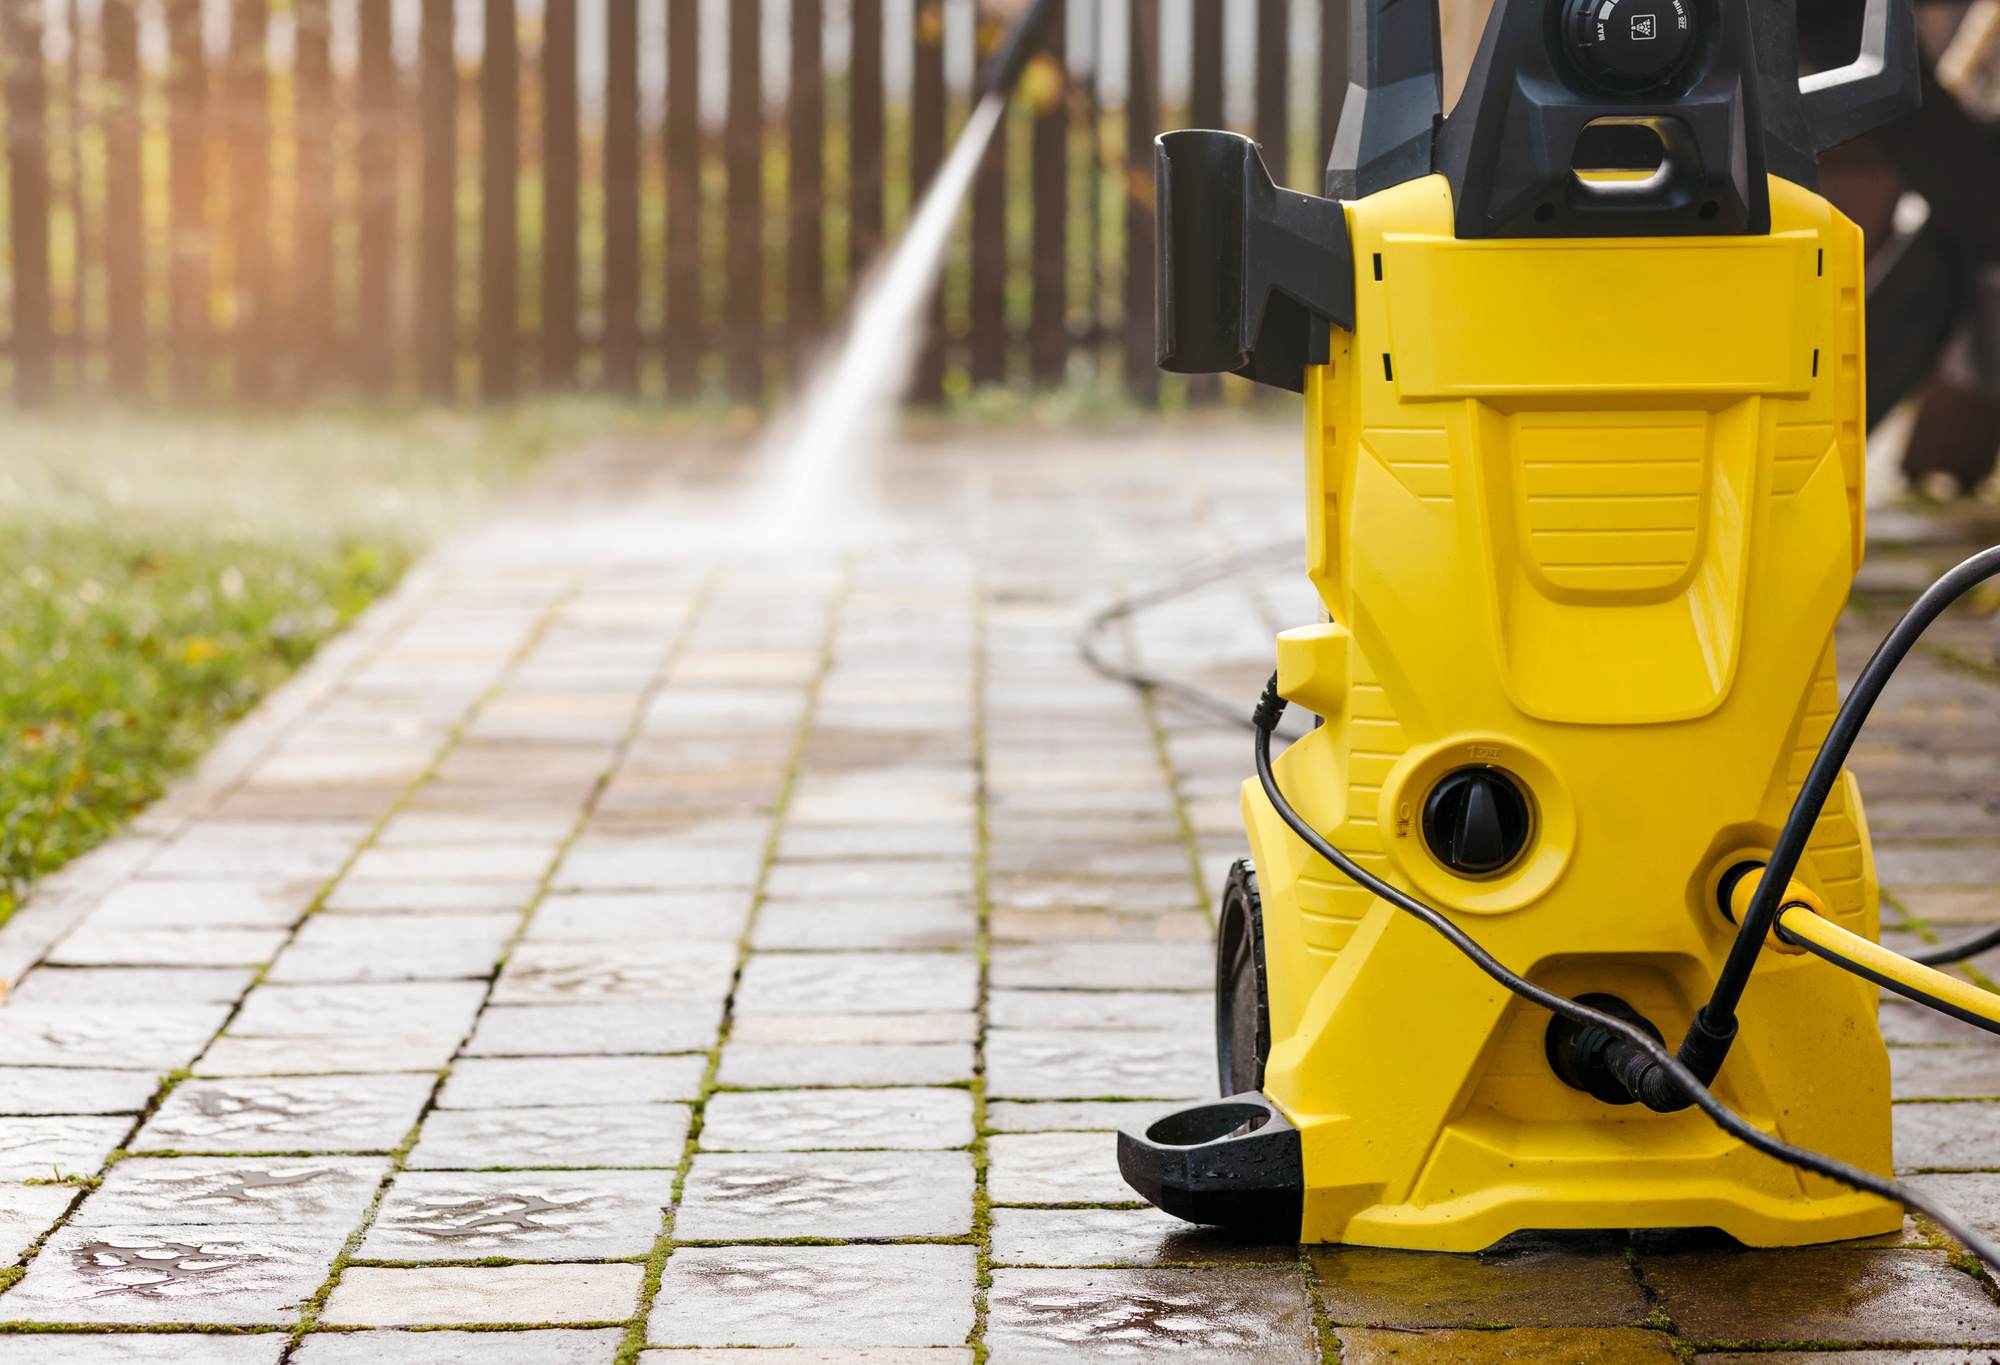 Pressure Washer Maintenance: How To Extend Your Machine's Life